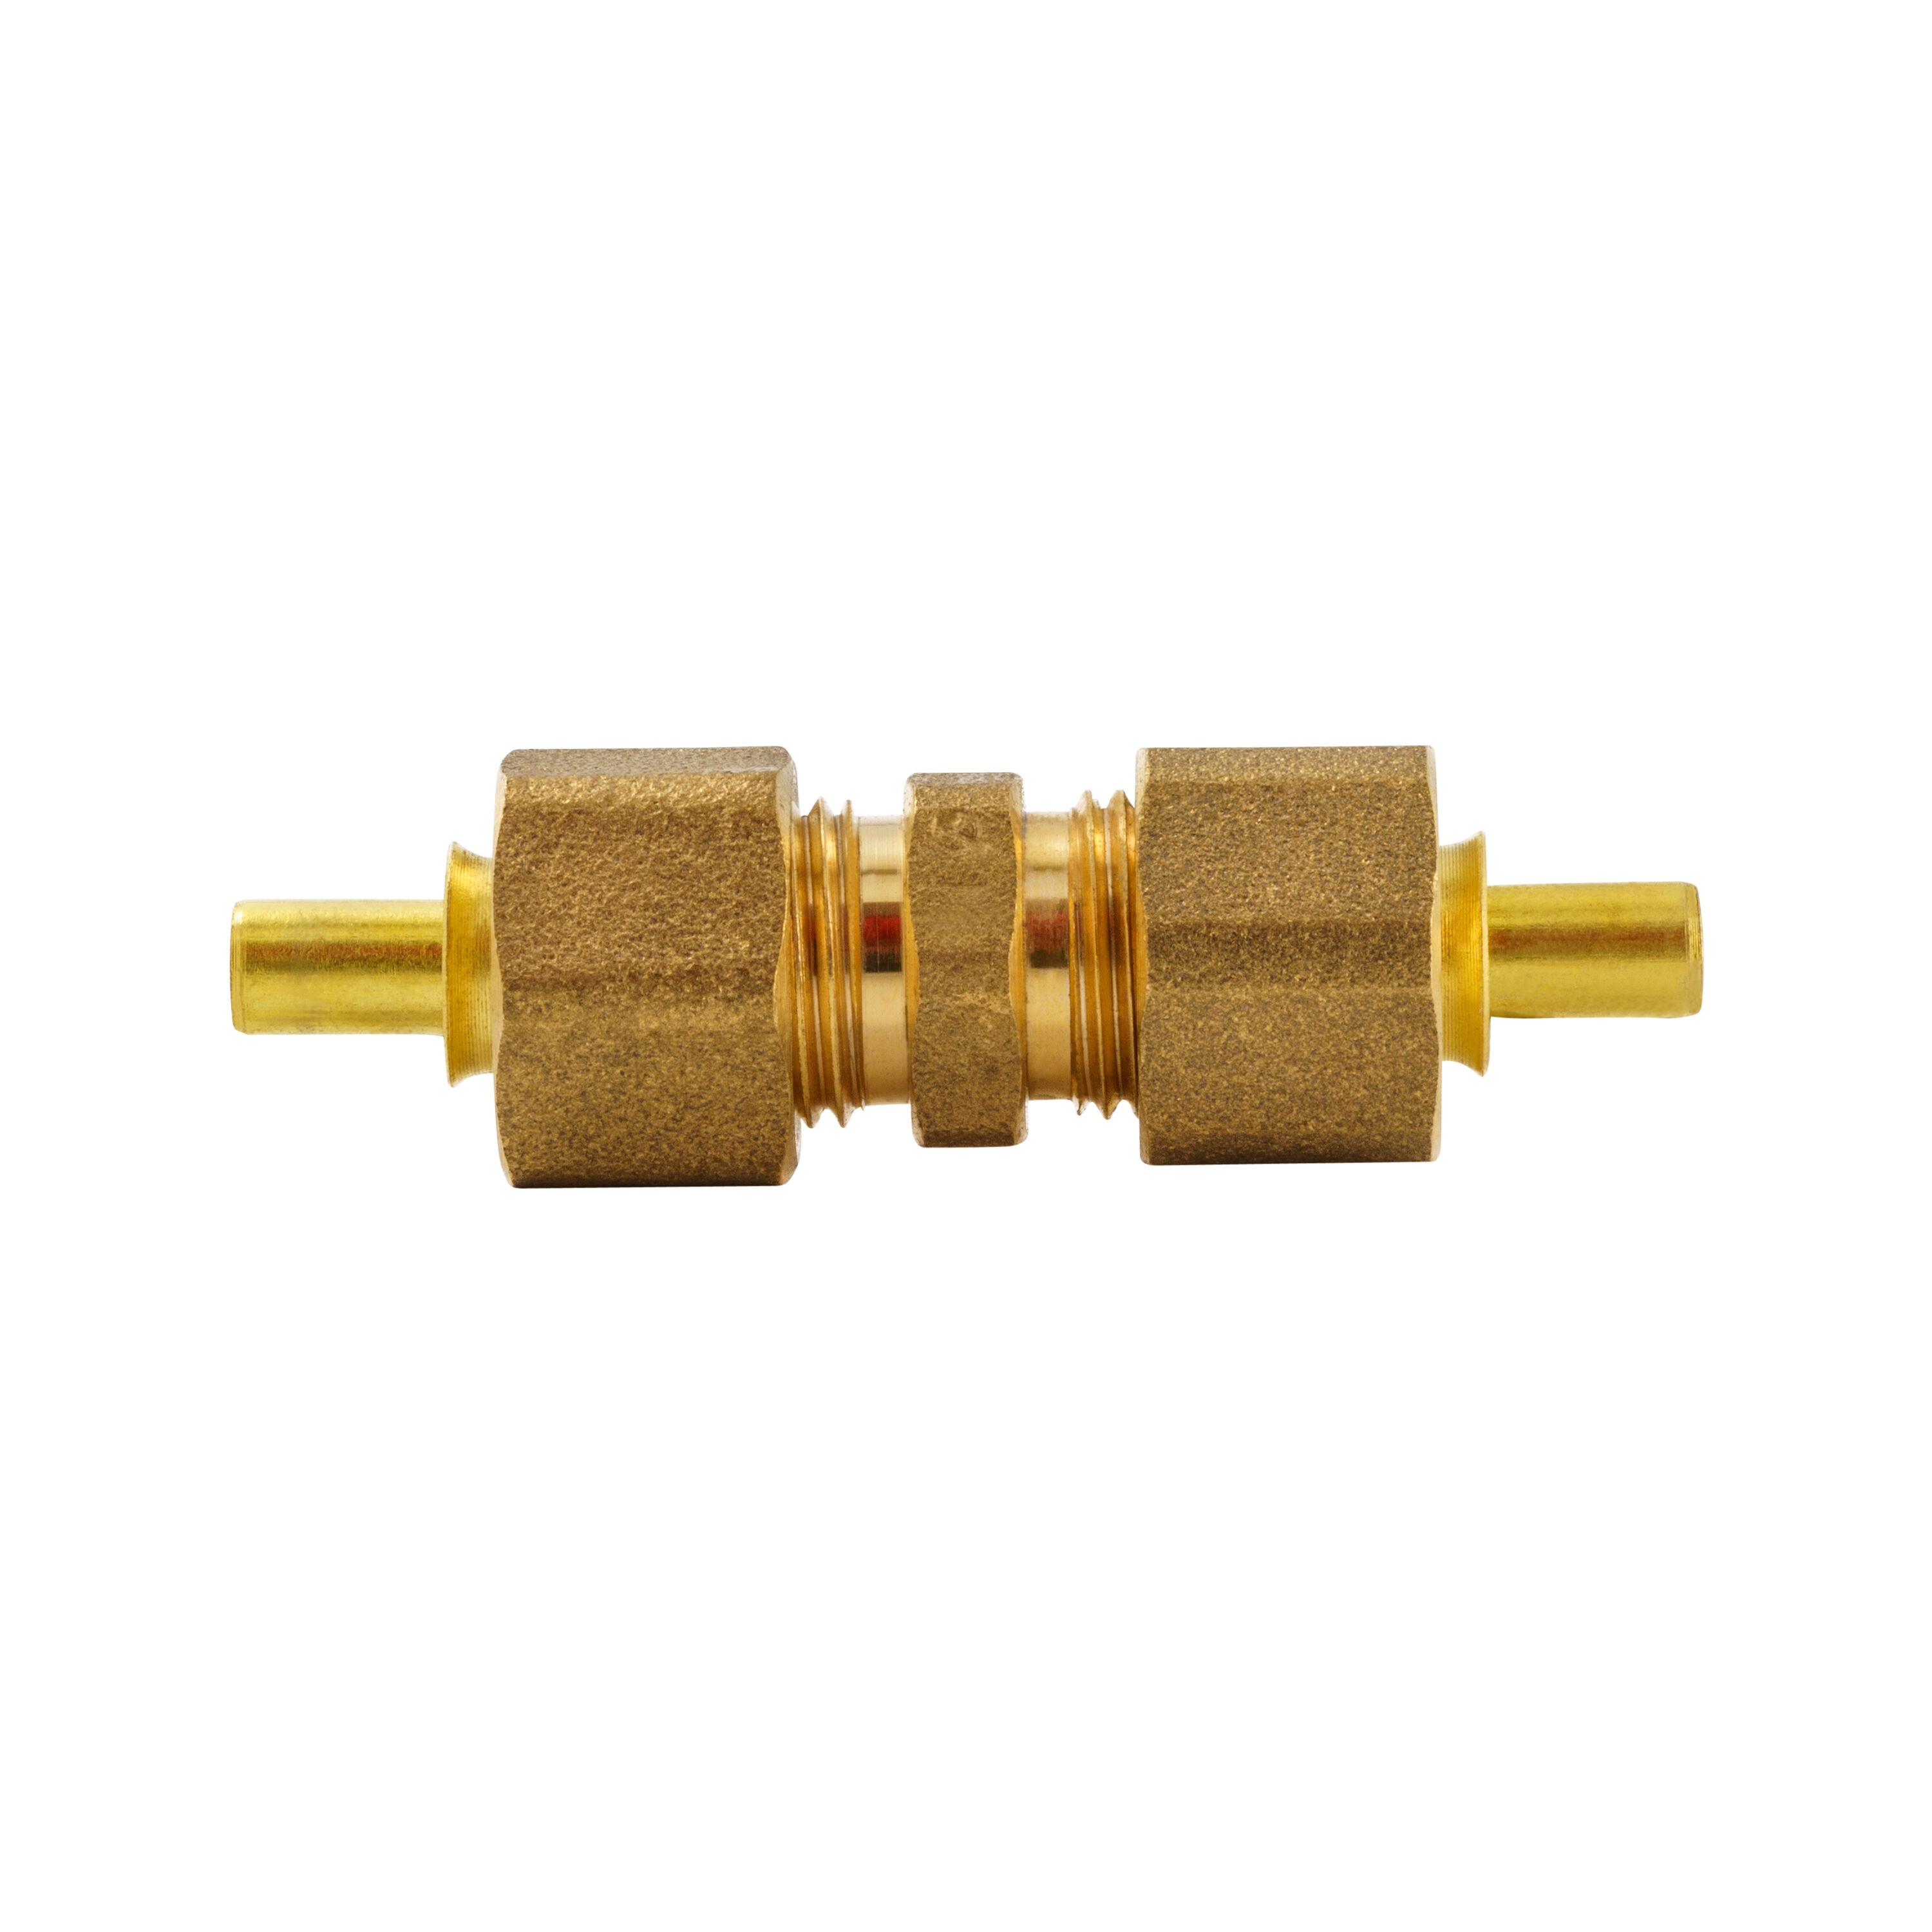 Brass tube fittings, brass flared tube/ Compression fittings suppliers